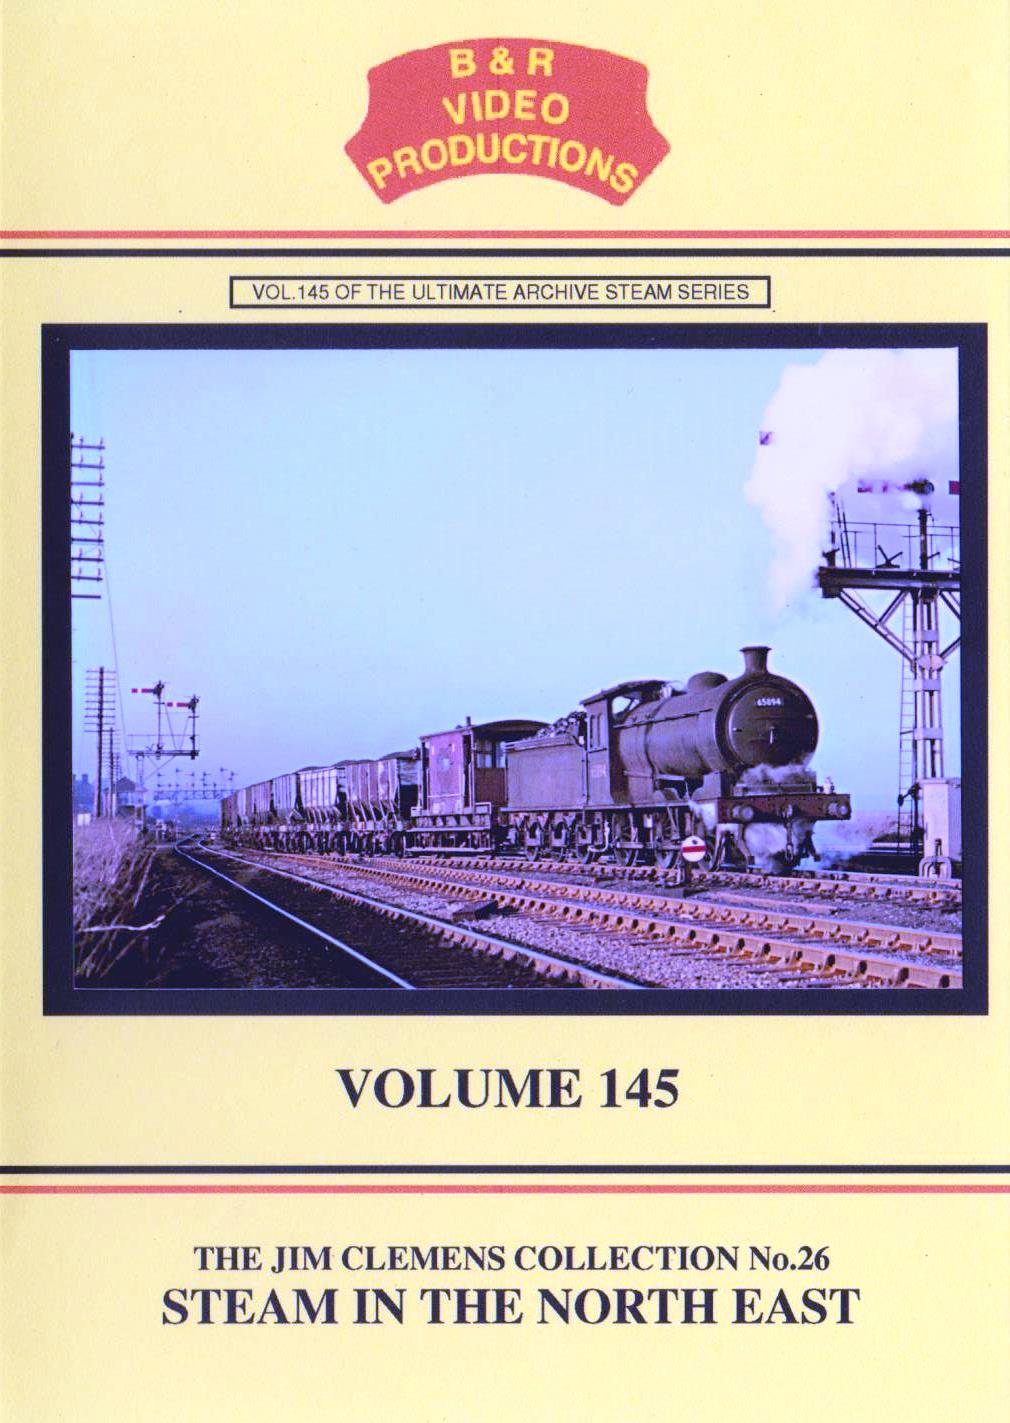 B & R Video Productions Vol 145 - The Jim Clemens collection No.26 Steam in the North East